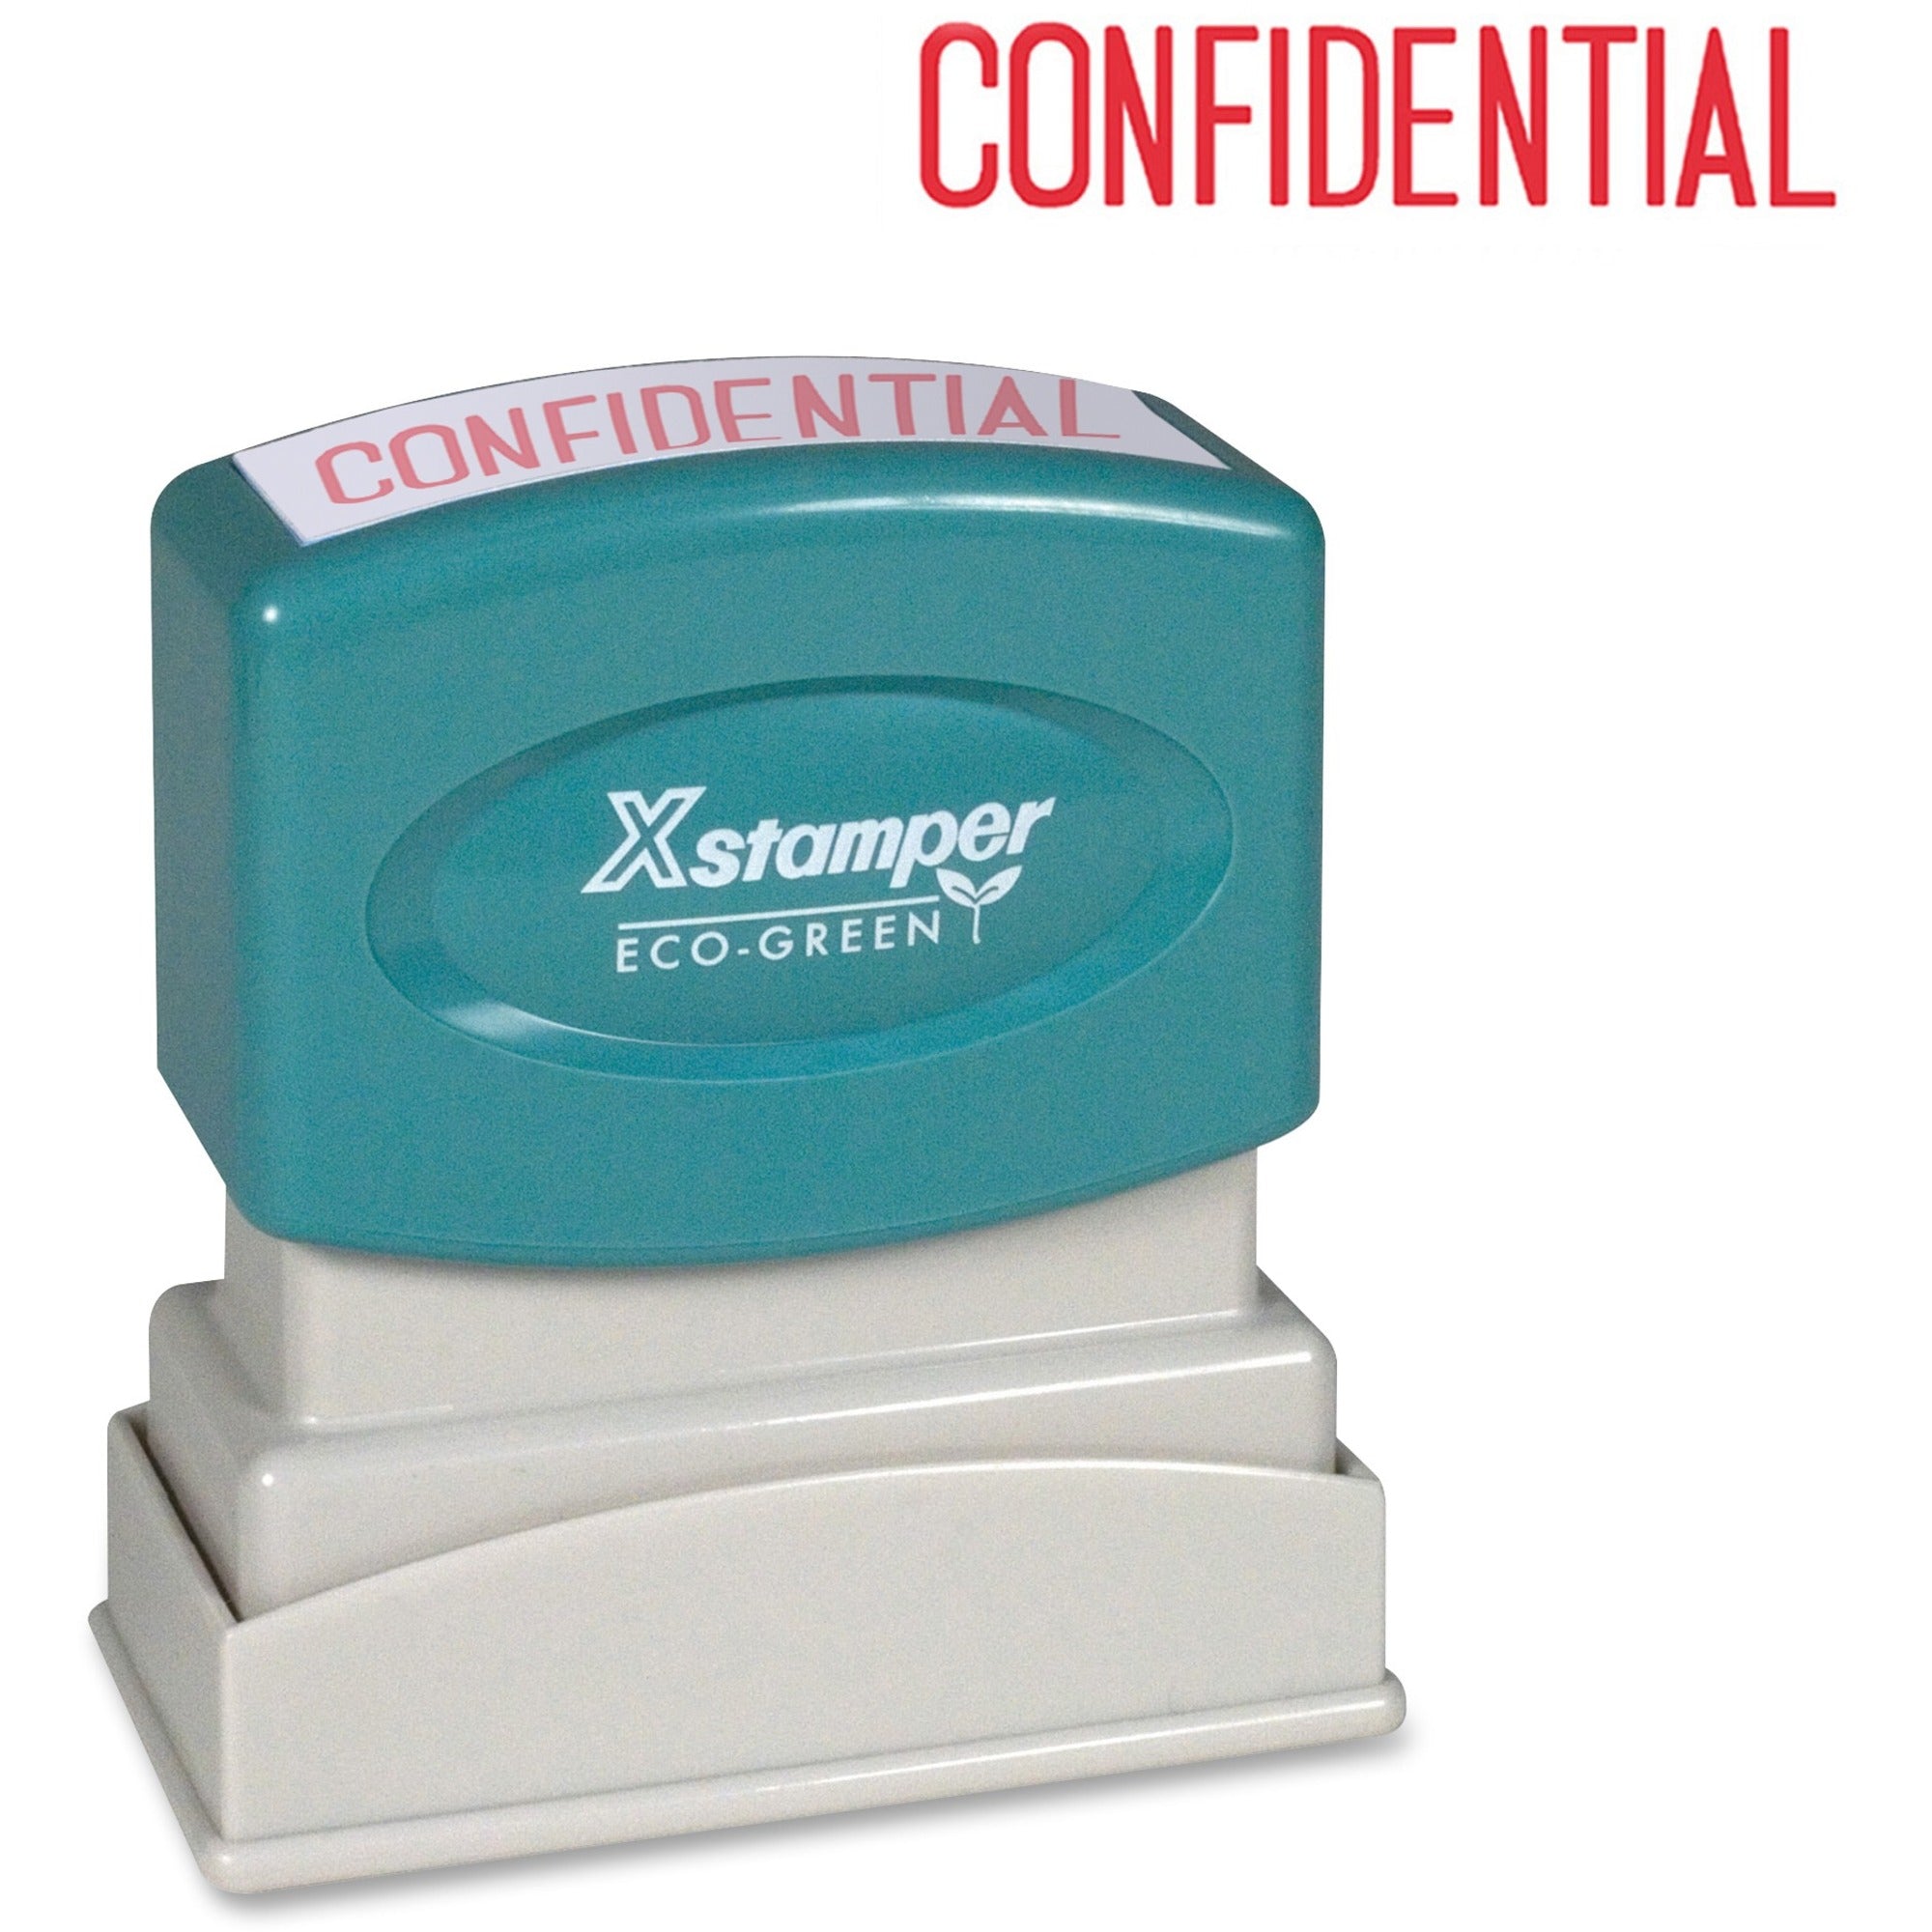 Xstamper CONFIDENTIAL Title Stamp - Message Stamp - "CONFIDENTIAL" - 0.50" Impression Width x 1.63" Impression Length - 100000 Impression(s) - Red - Recycled - 1 Each - 